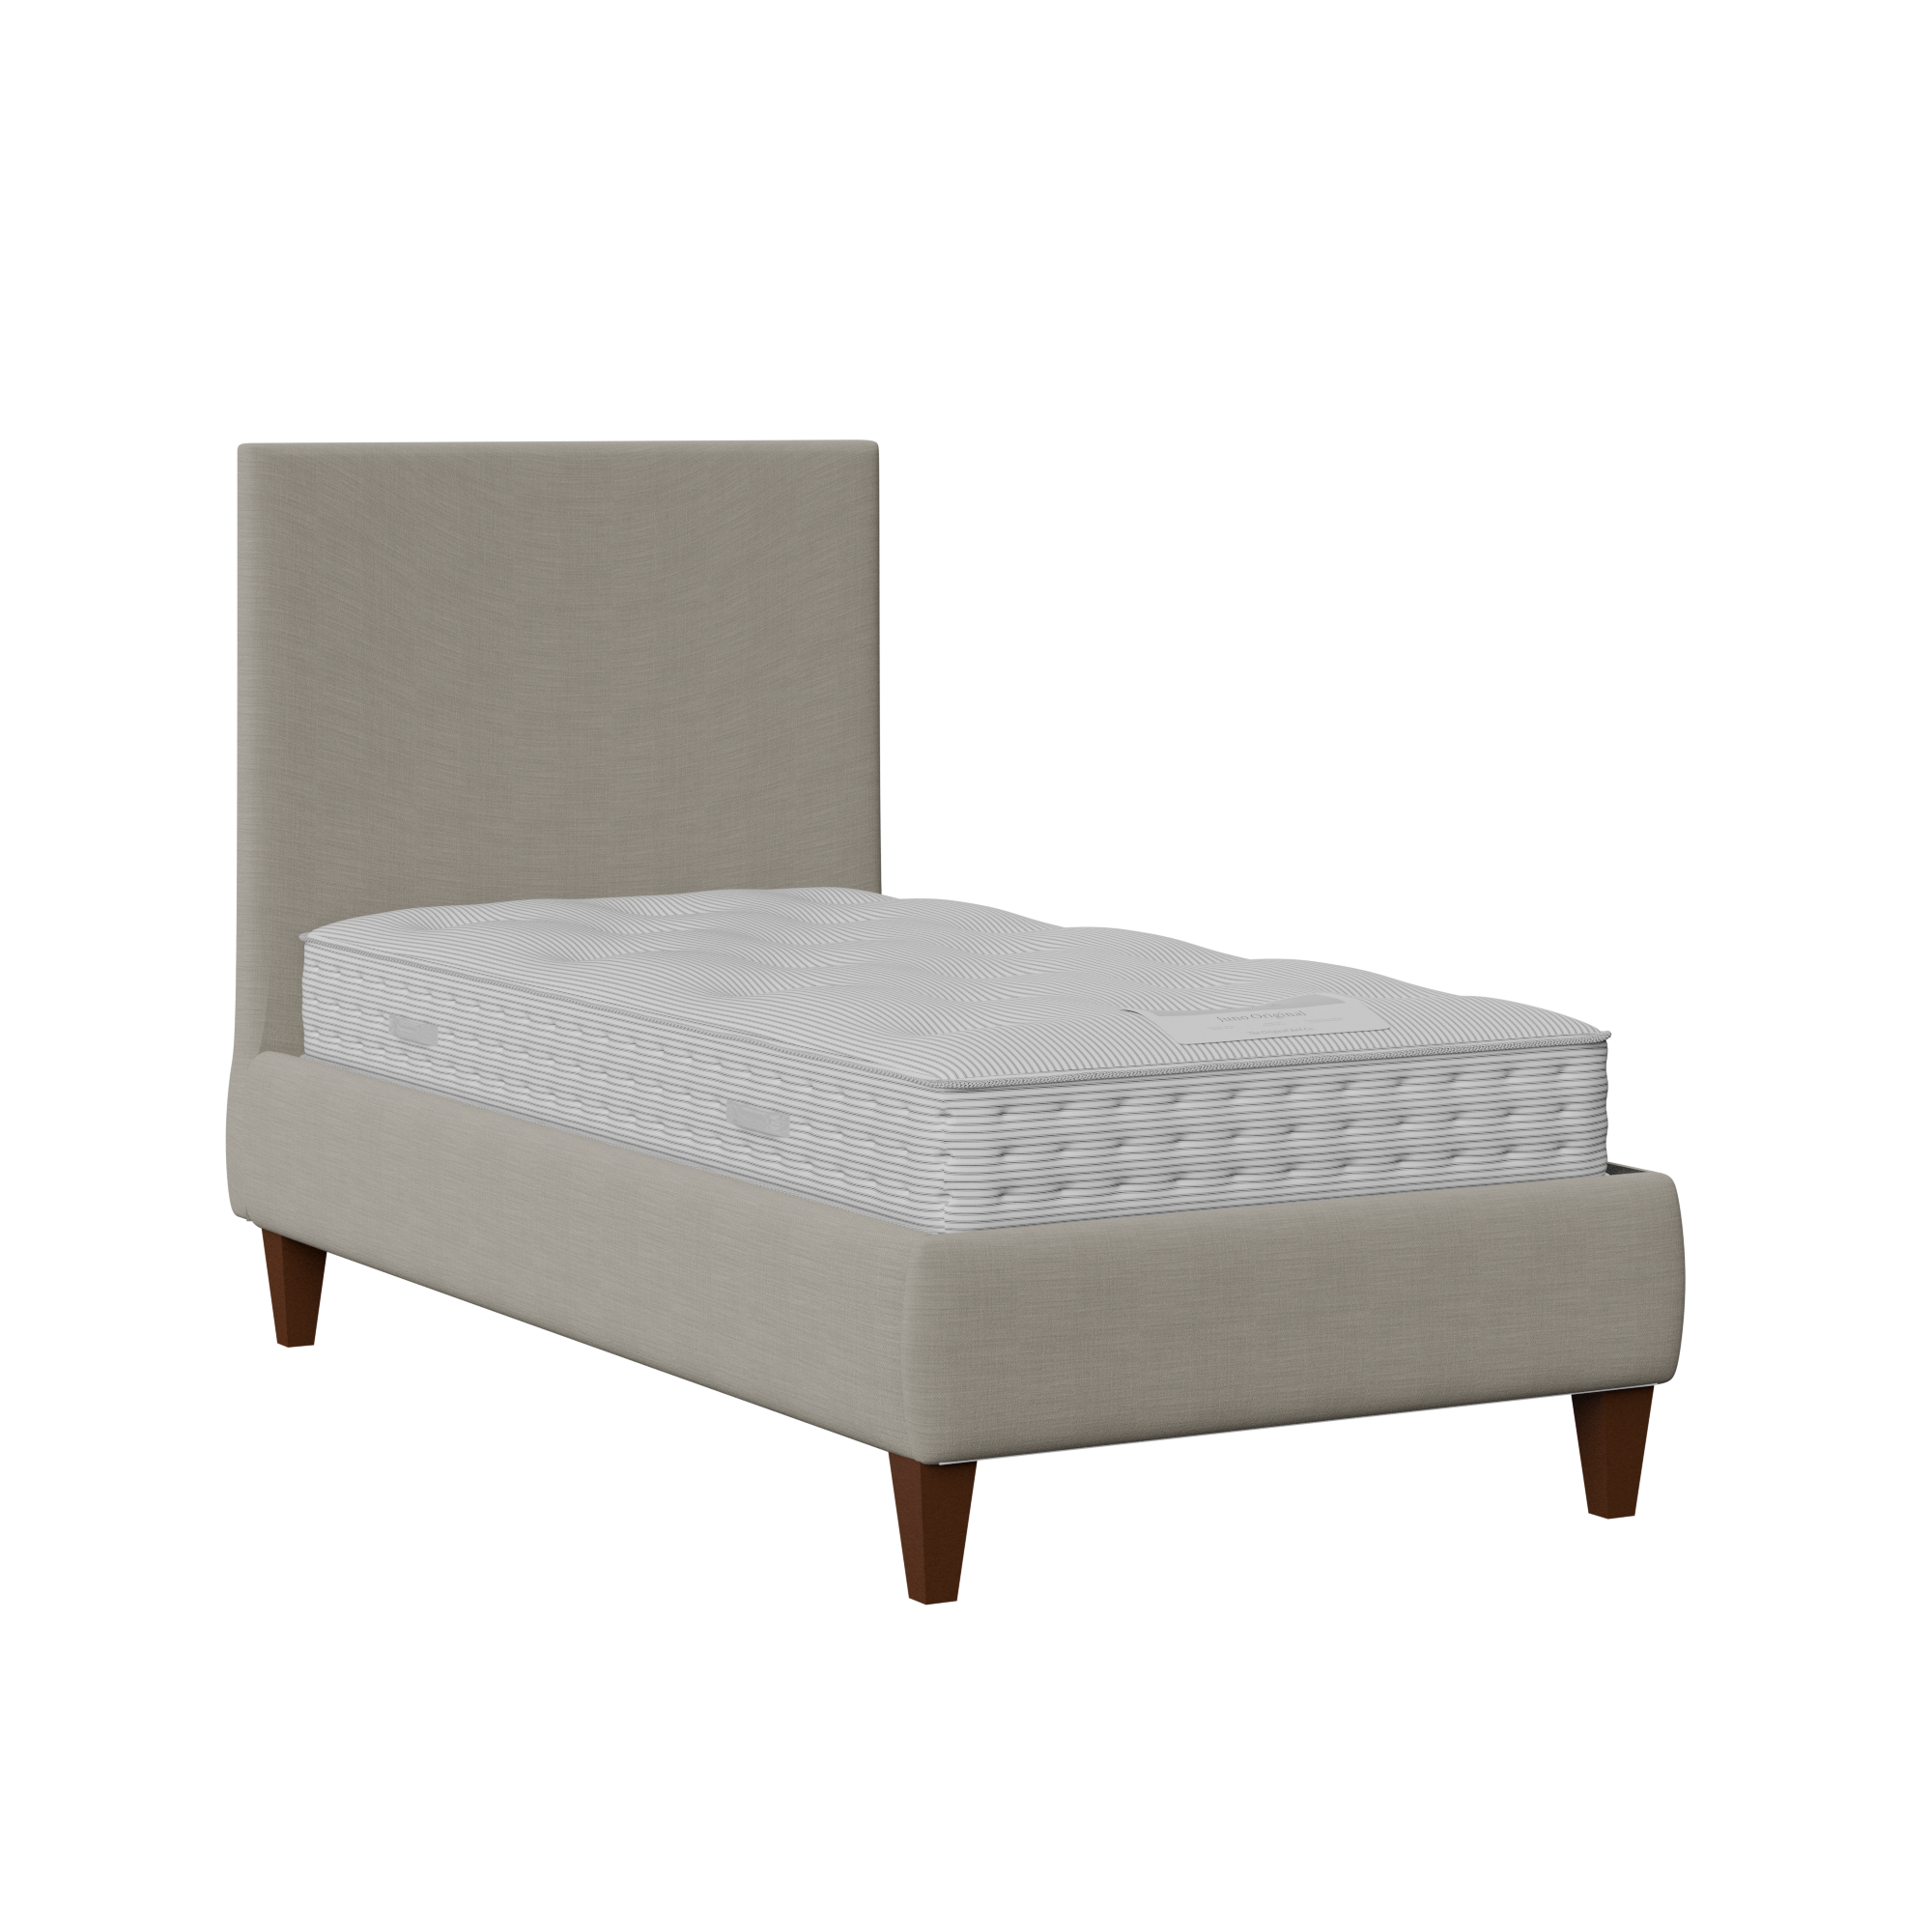 Yushan upholstered single bed in grey fabric